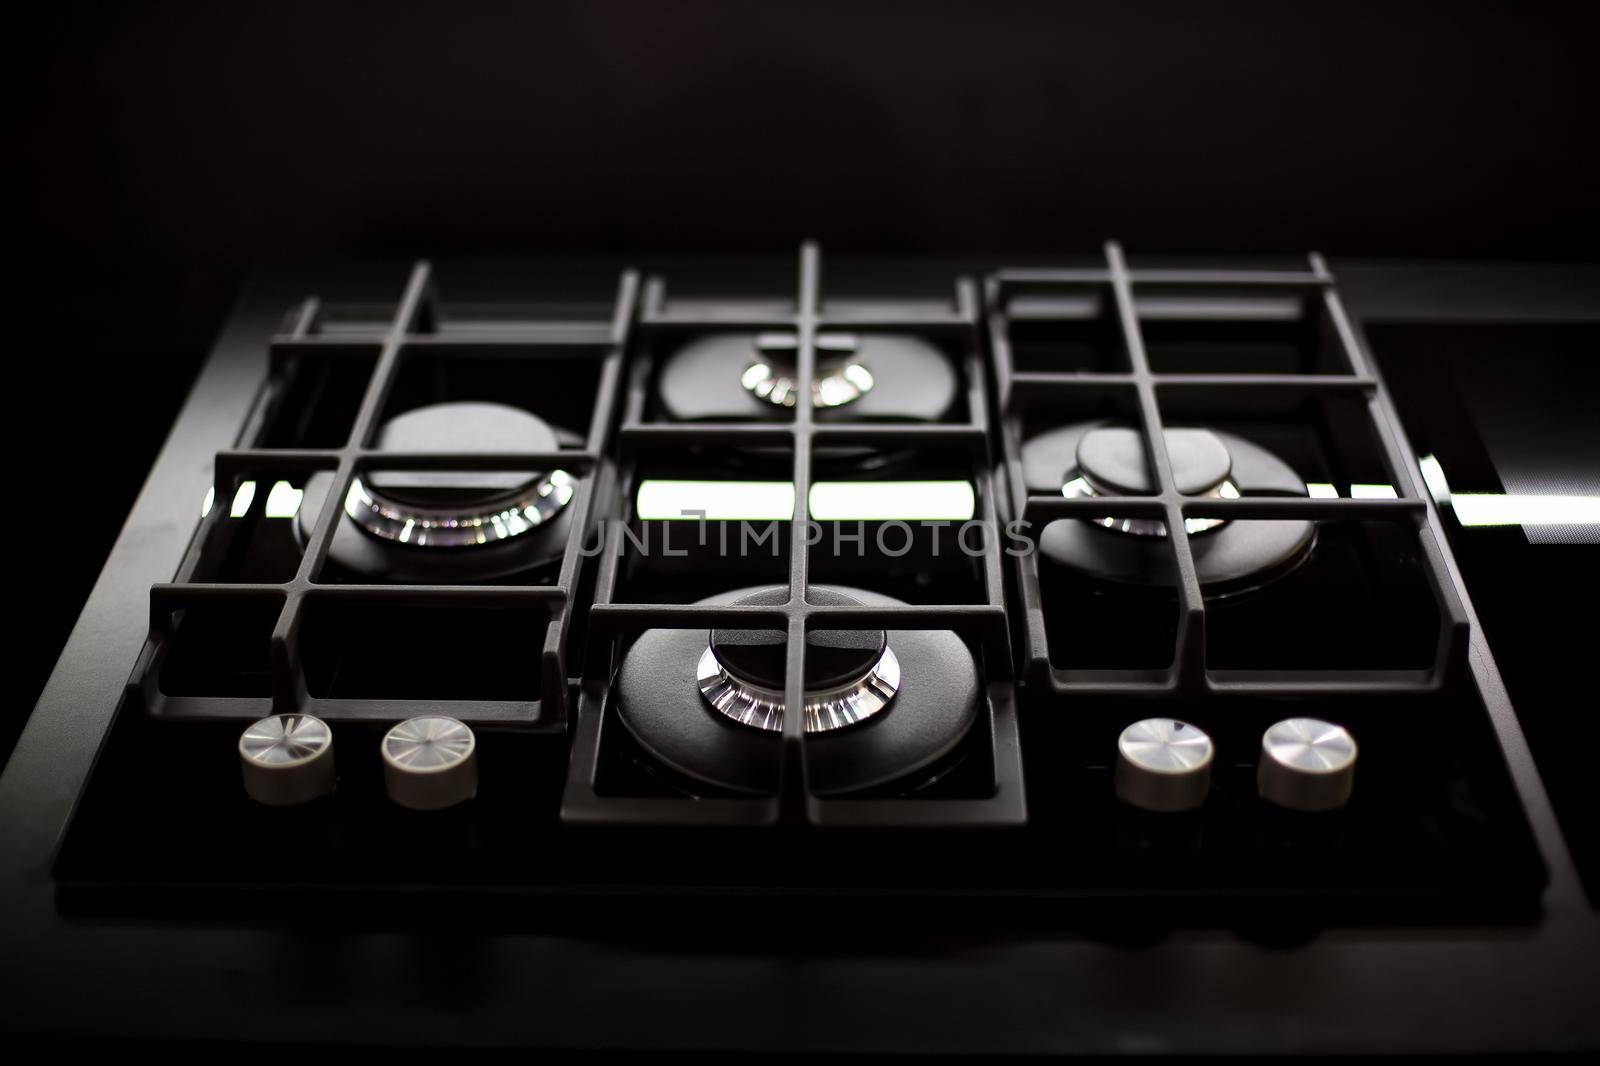 New modern gas stove with four burners for the kitchen, stainless steel surface. Cast iron grates. top view, close up by Mariaprovector